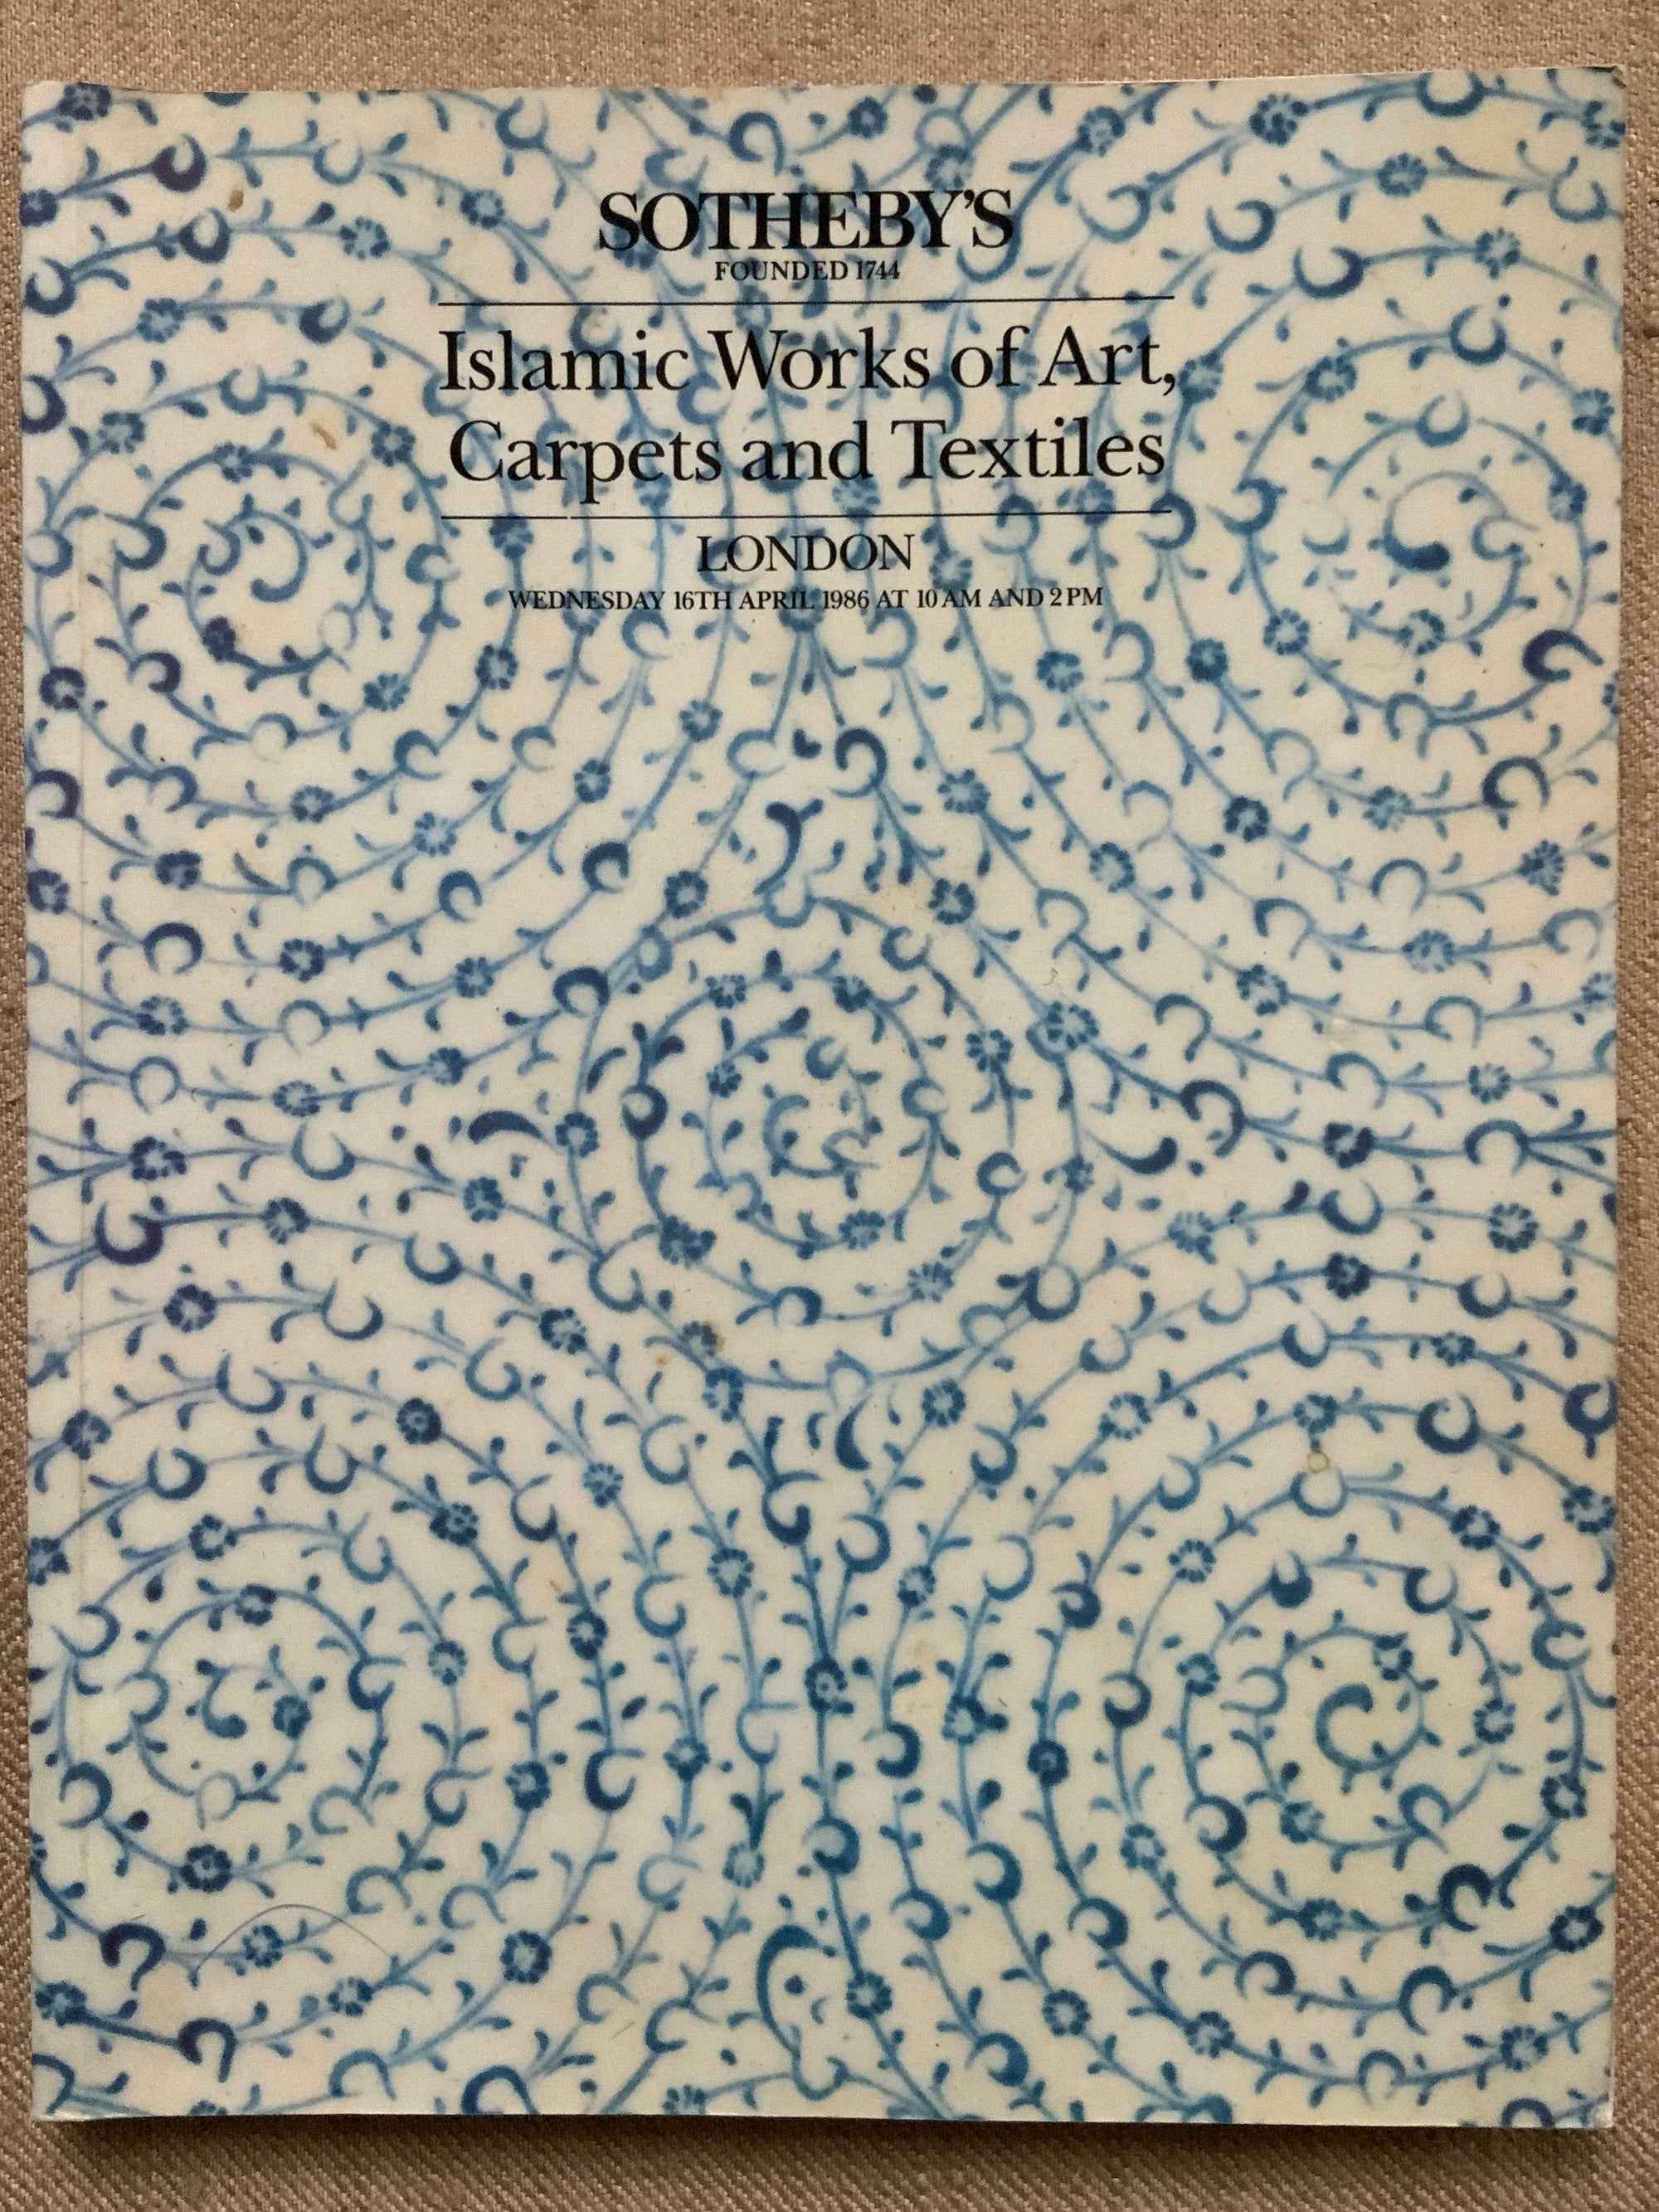 Sotheby’s London Islamic Works of Art, Carpets and Textiles 16 April 1986